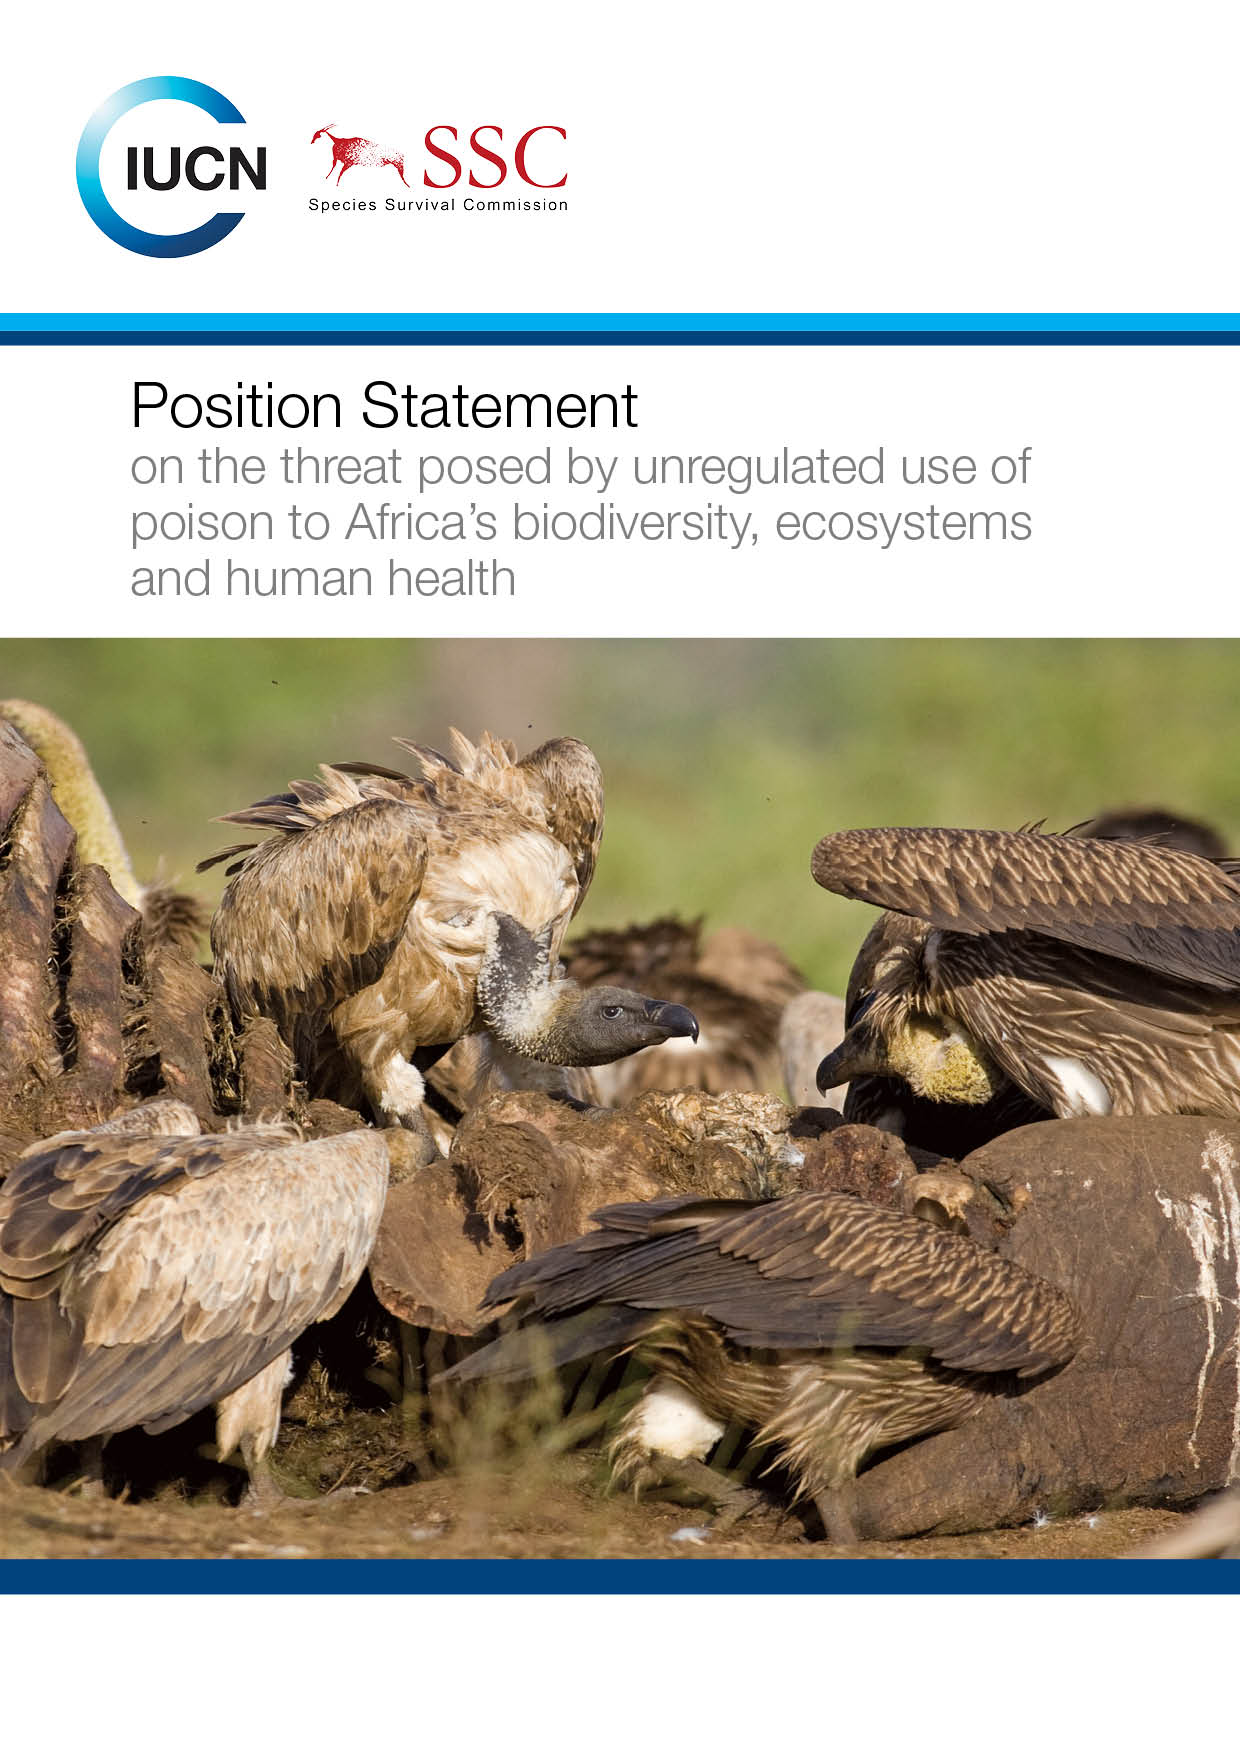 IUCN Commission Statement on the threat posed by unregulated use of poison